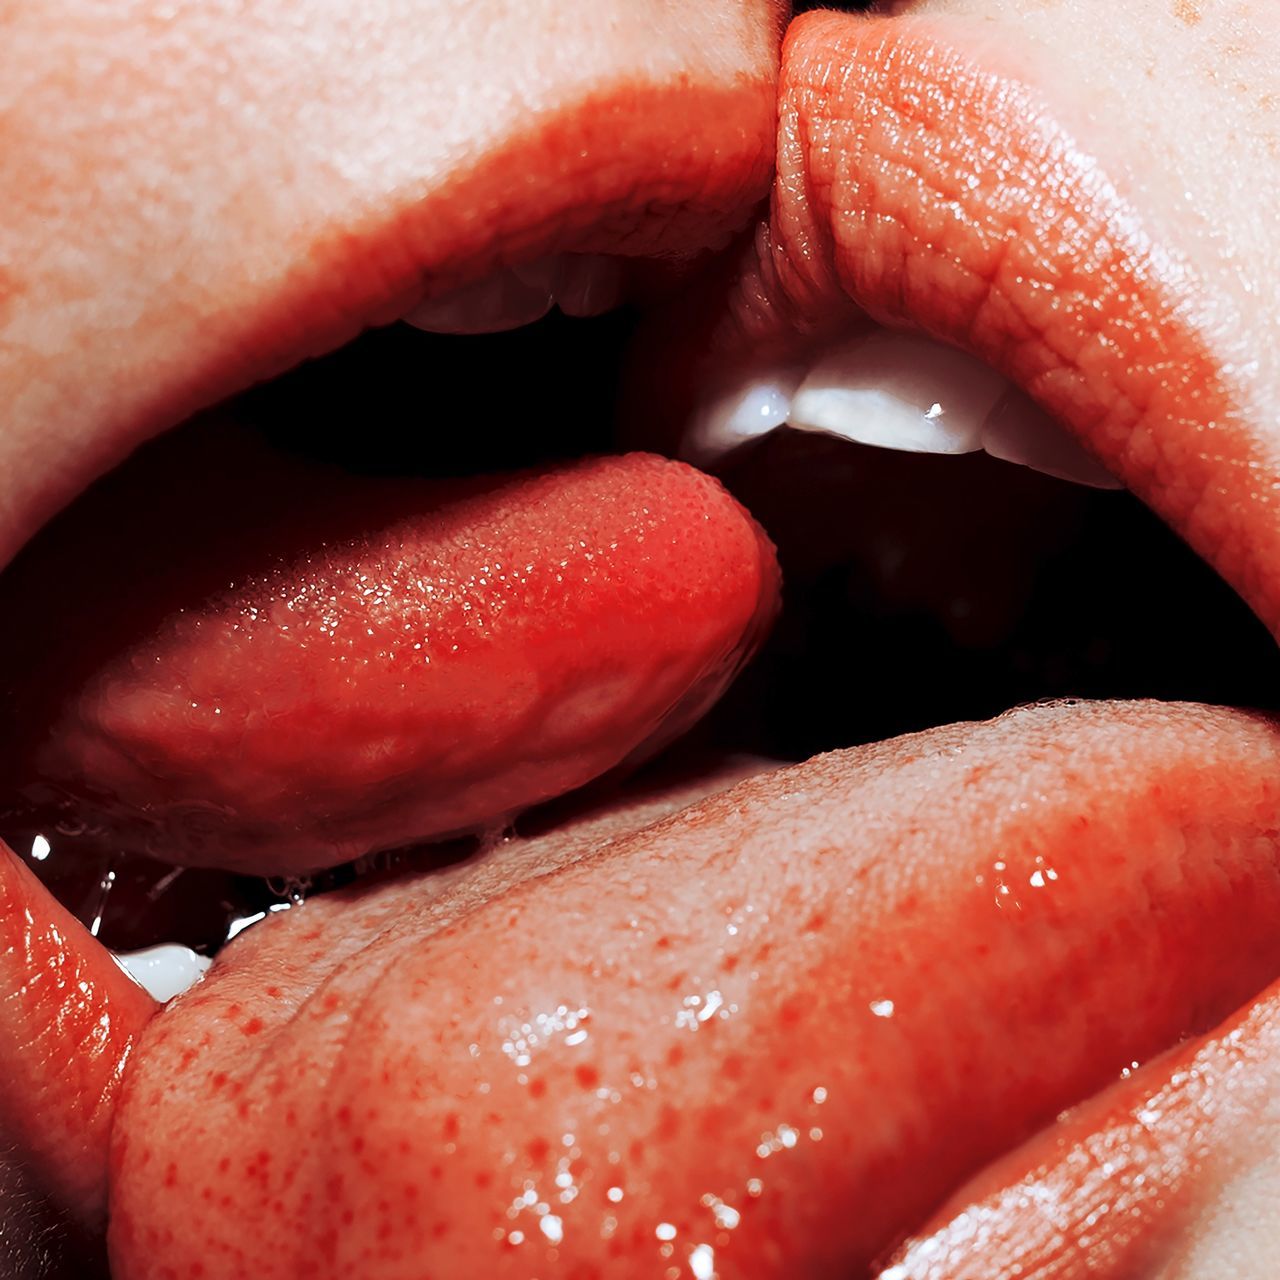 human lips, human mouth, close-up, red, food, lipstick, food and drink, human body part, make-up, freshness, lip gloss, real people, women, one person, adult, day, people